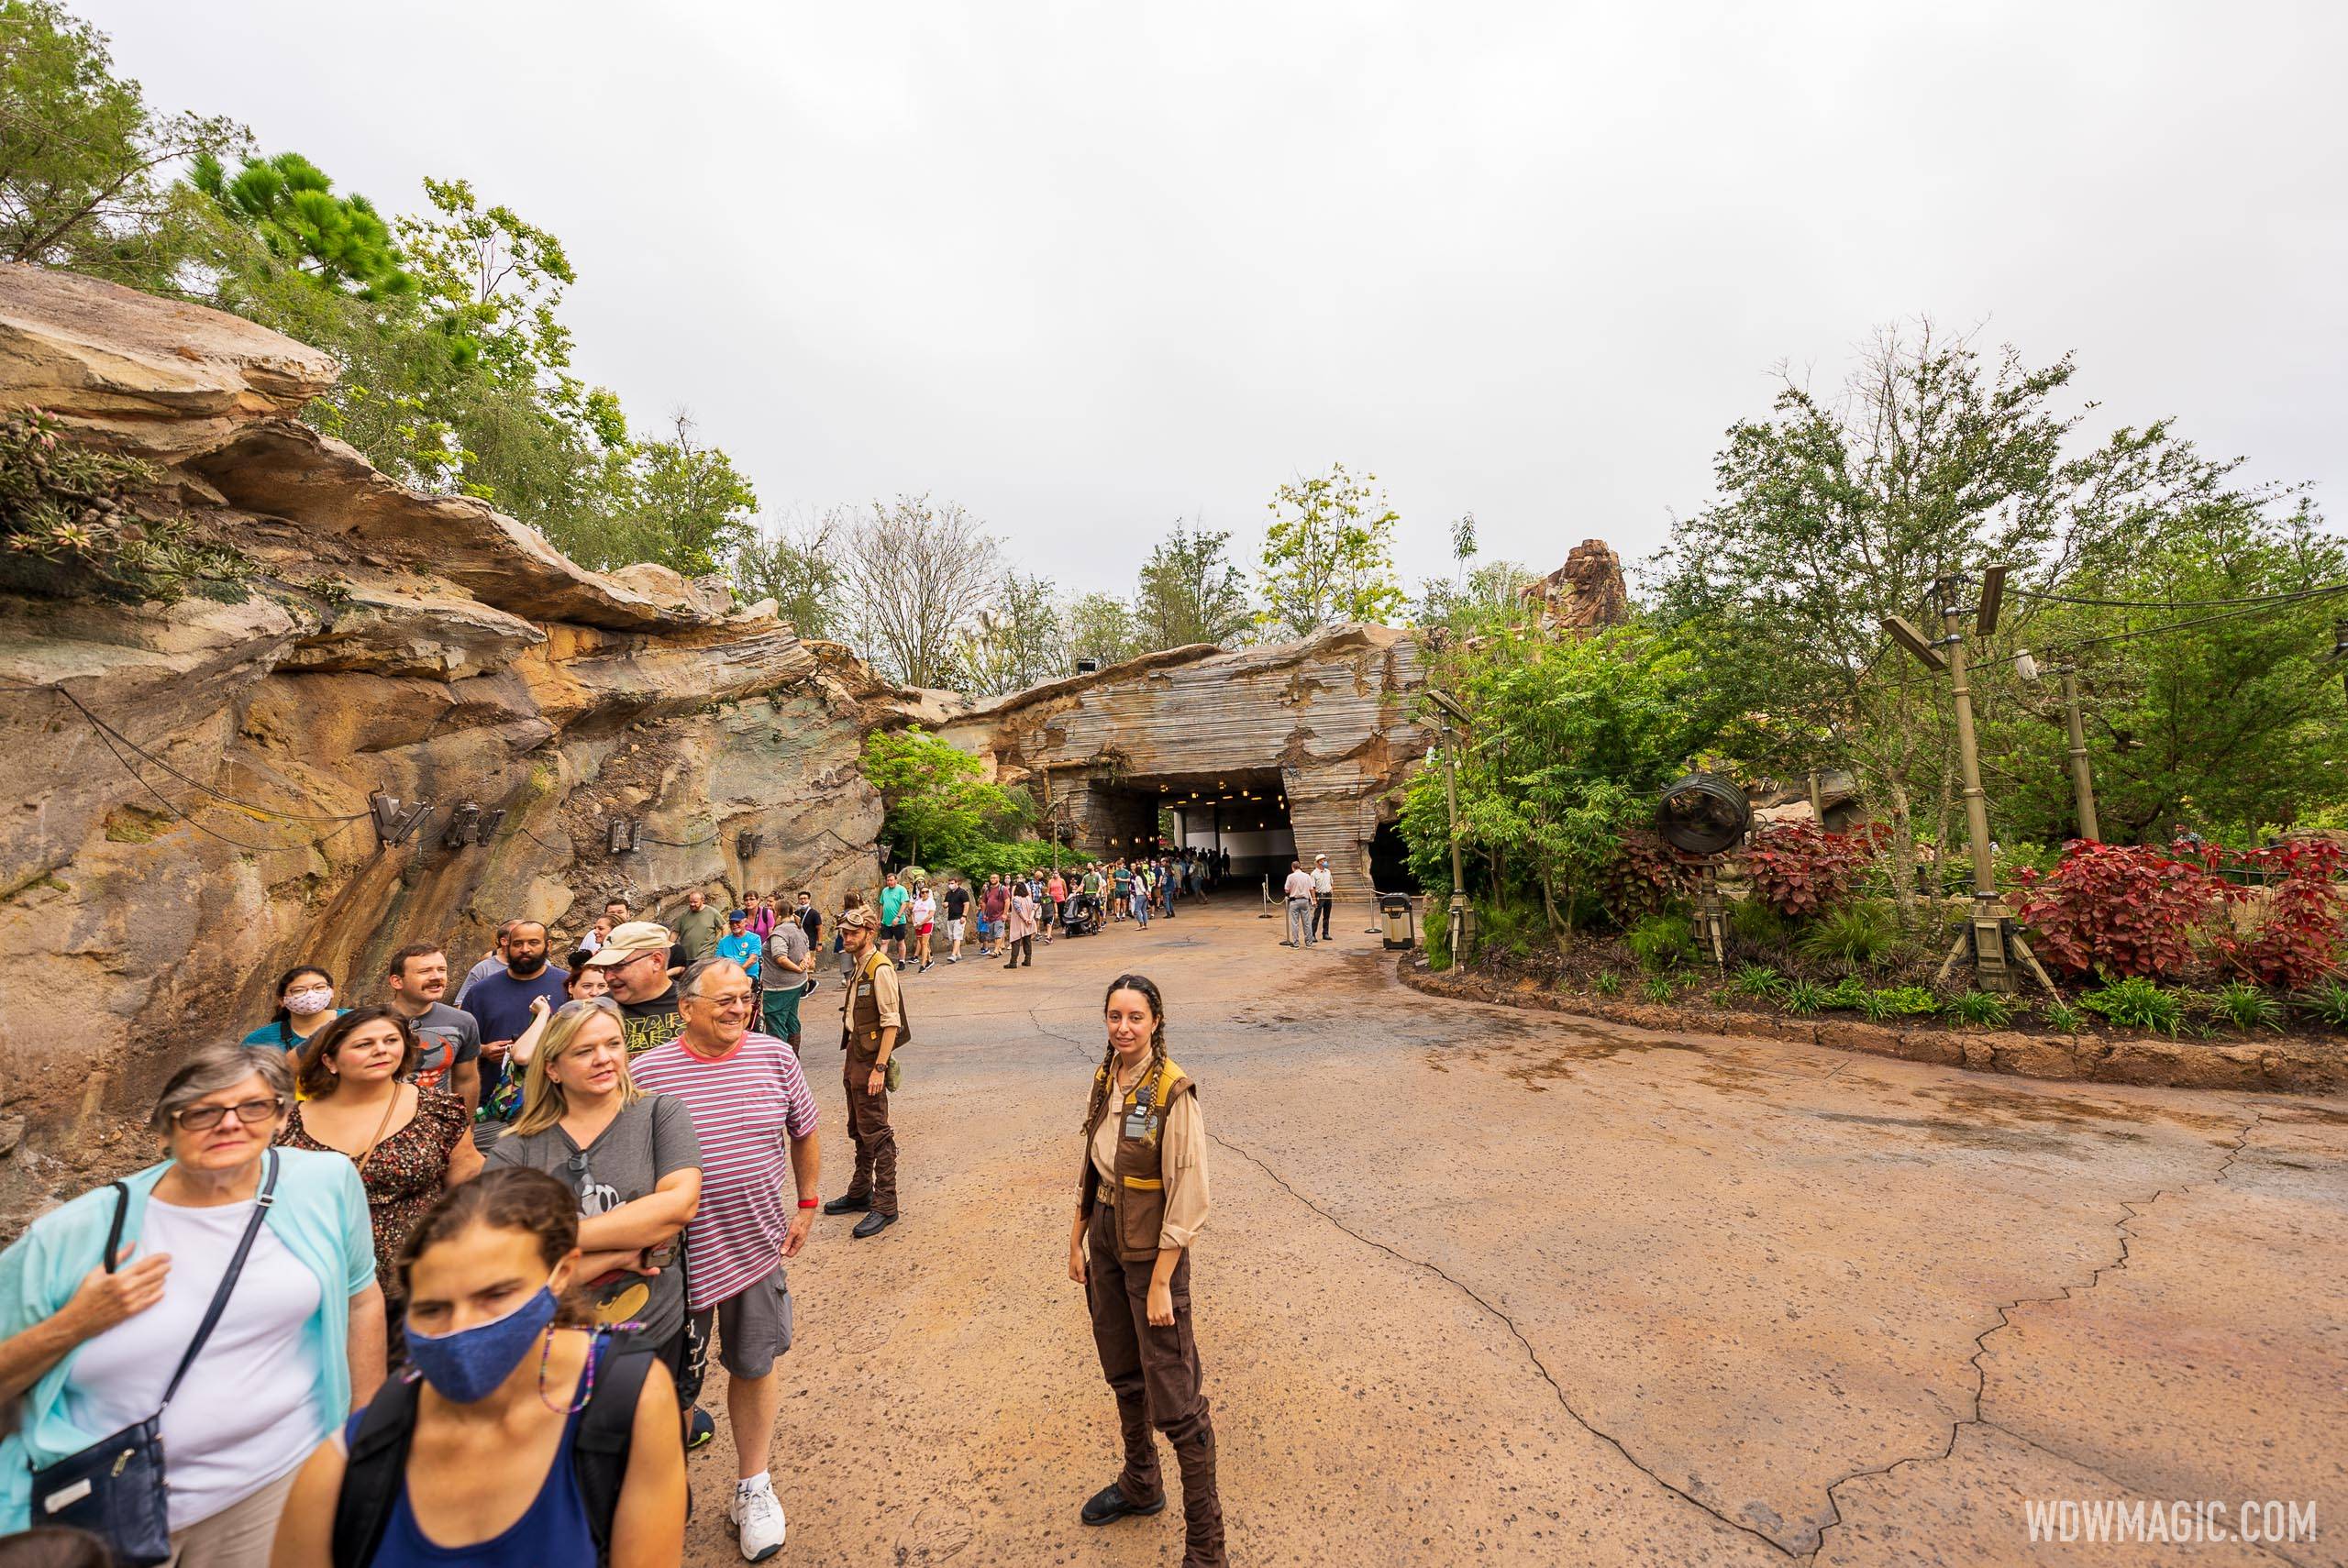 Star Wars Rise of the Resistance standby queue at 8:45am